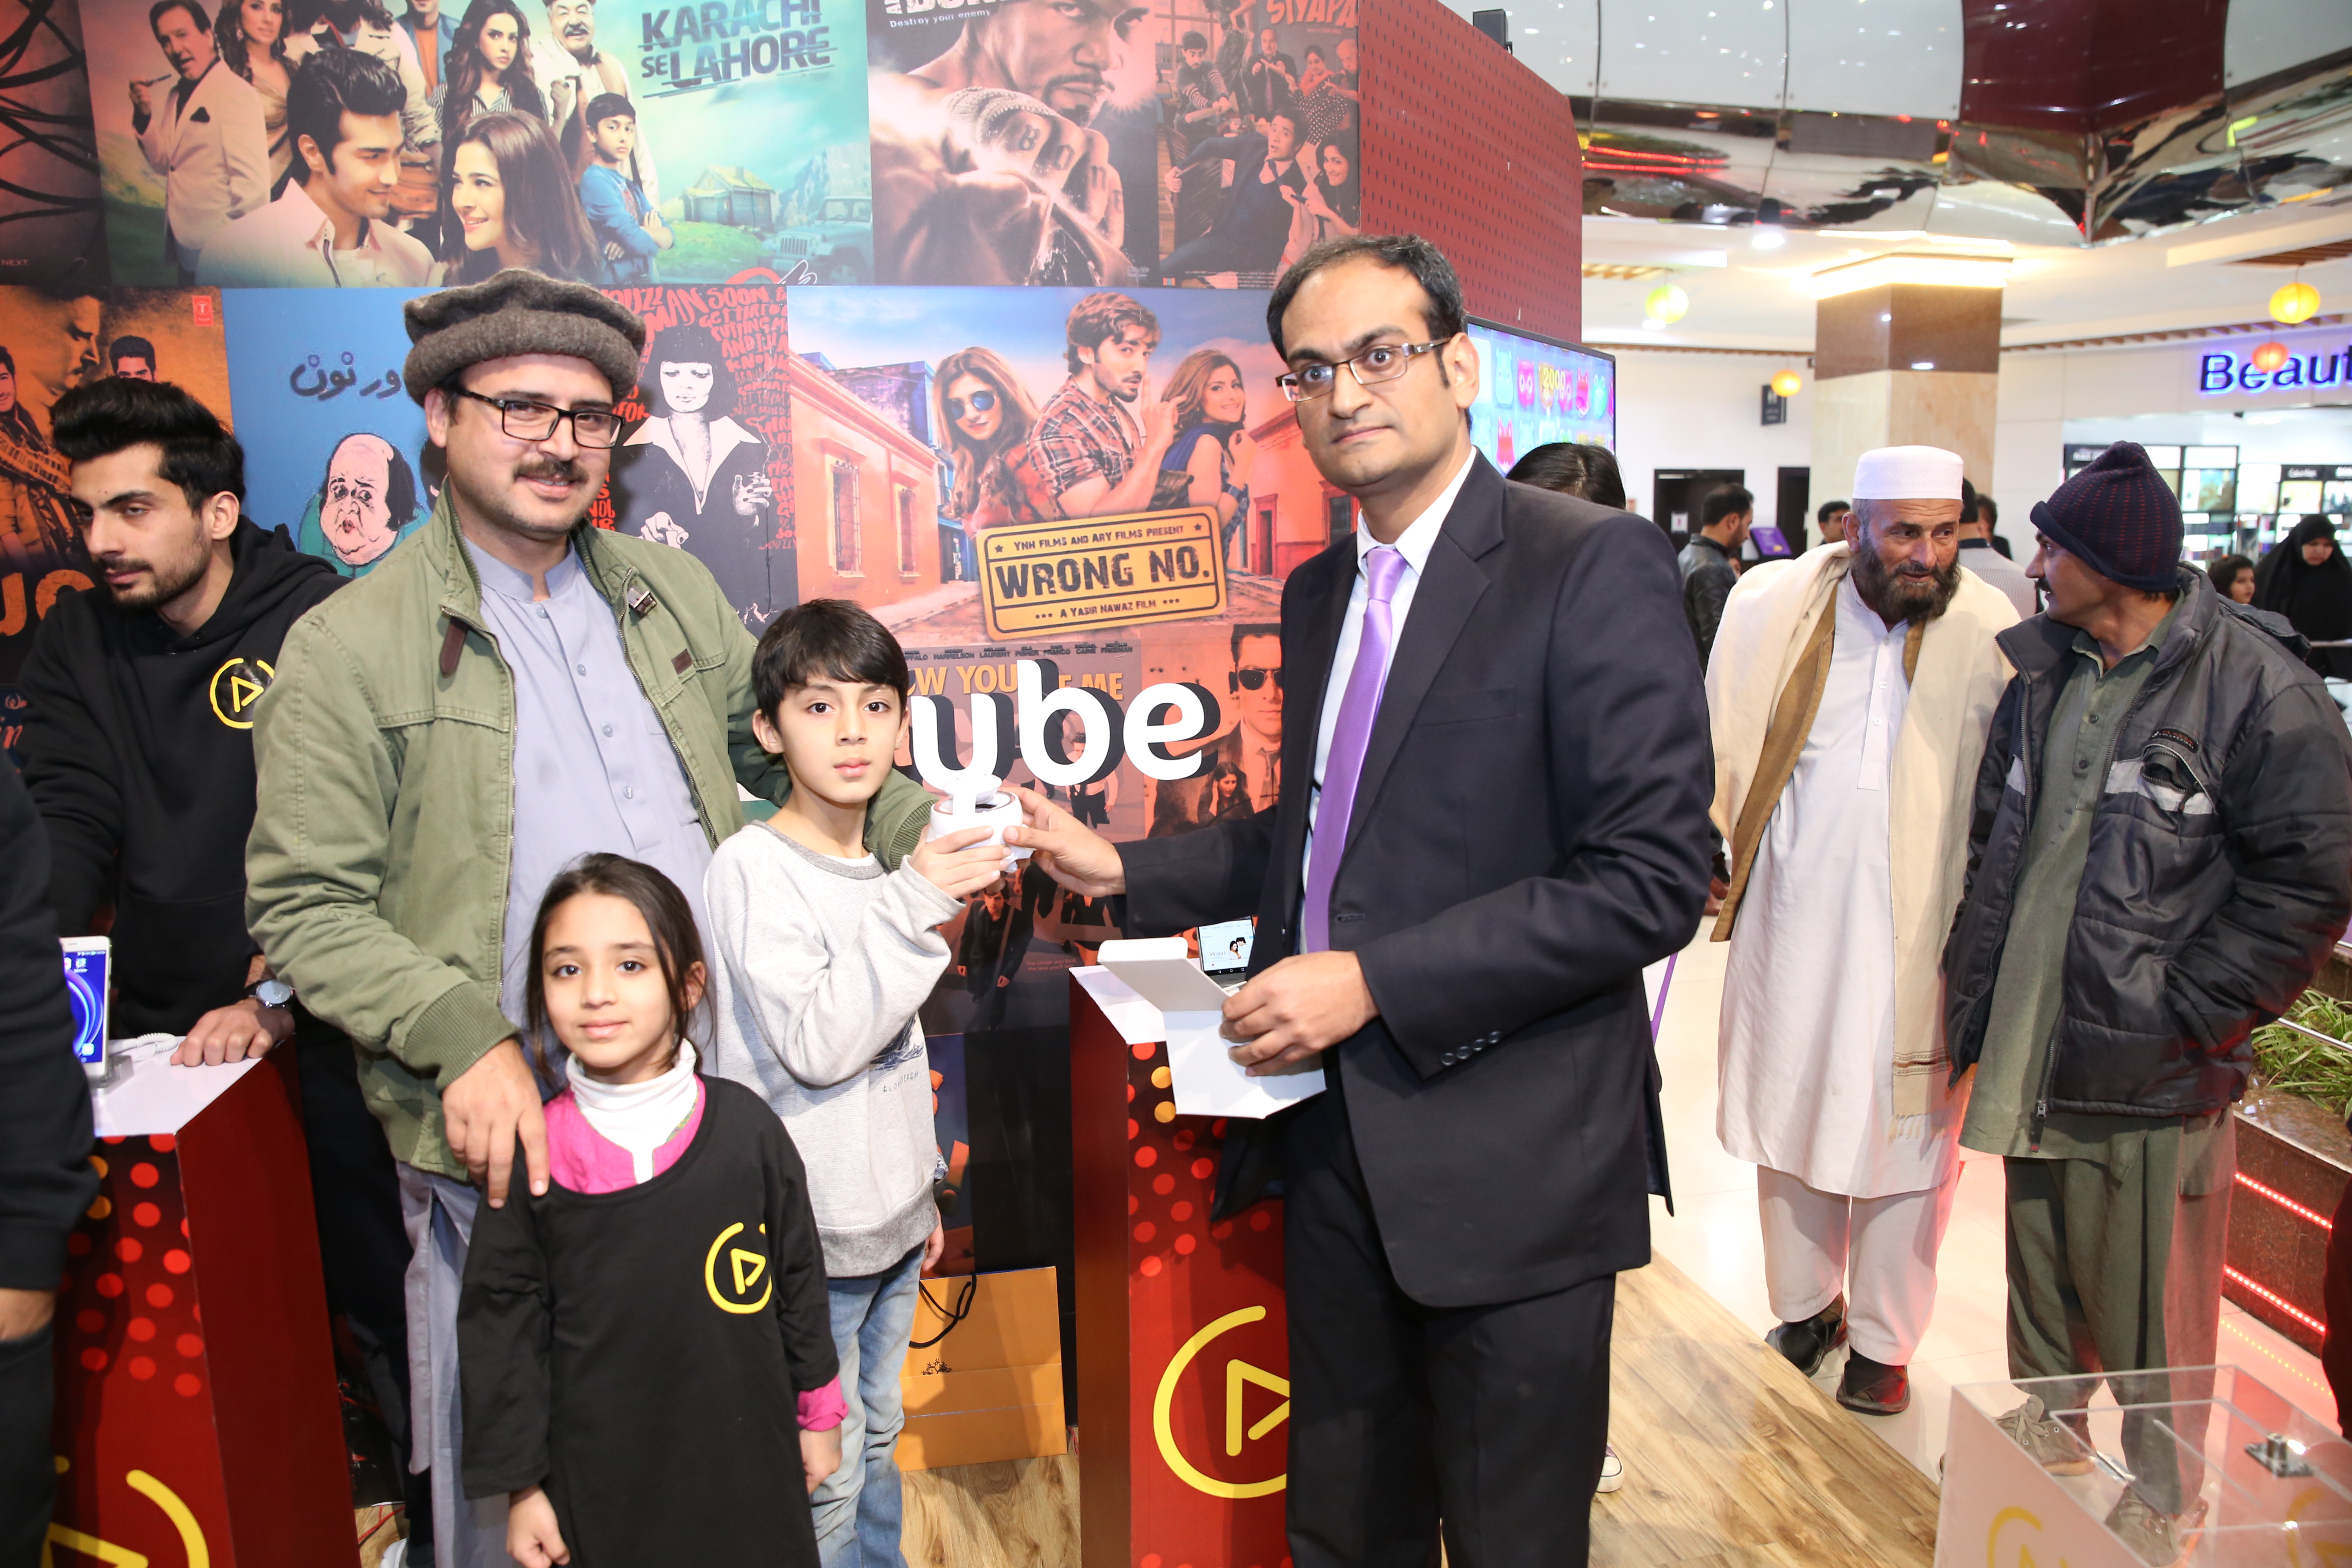 JazzTube & MoFun App organized a thrilling and exciting event in Islamabad